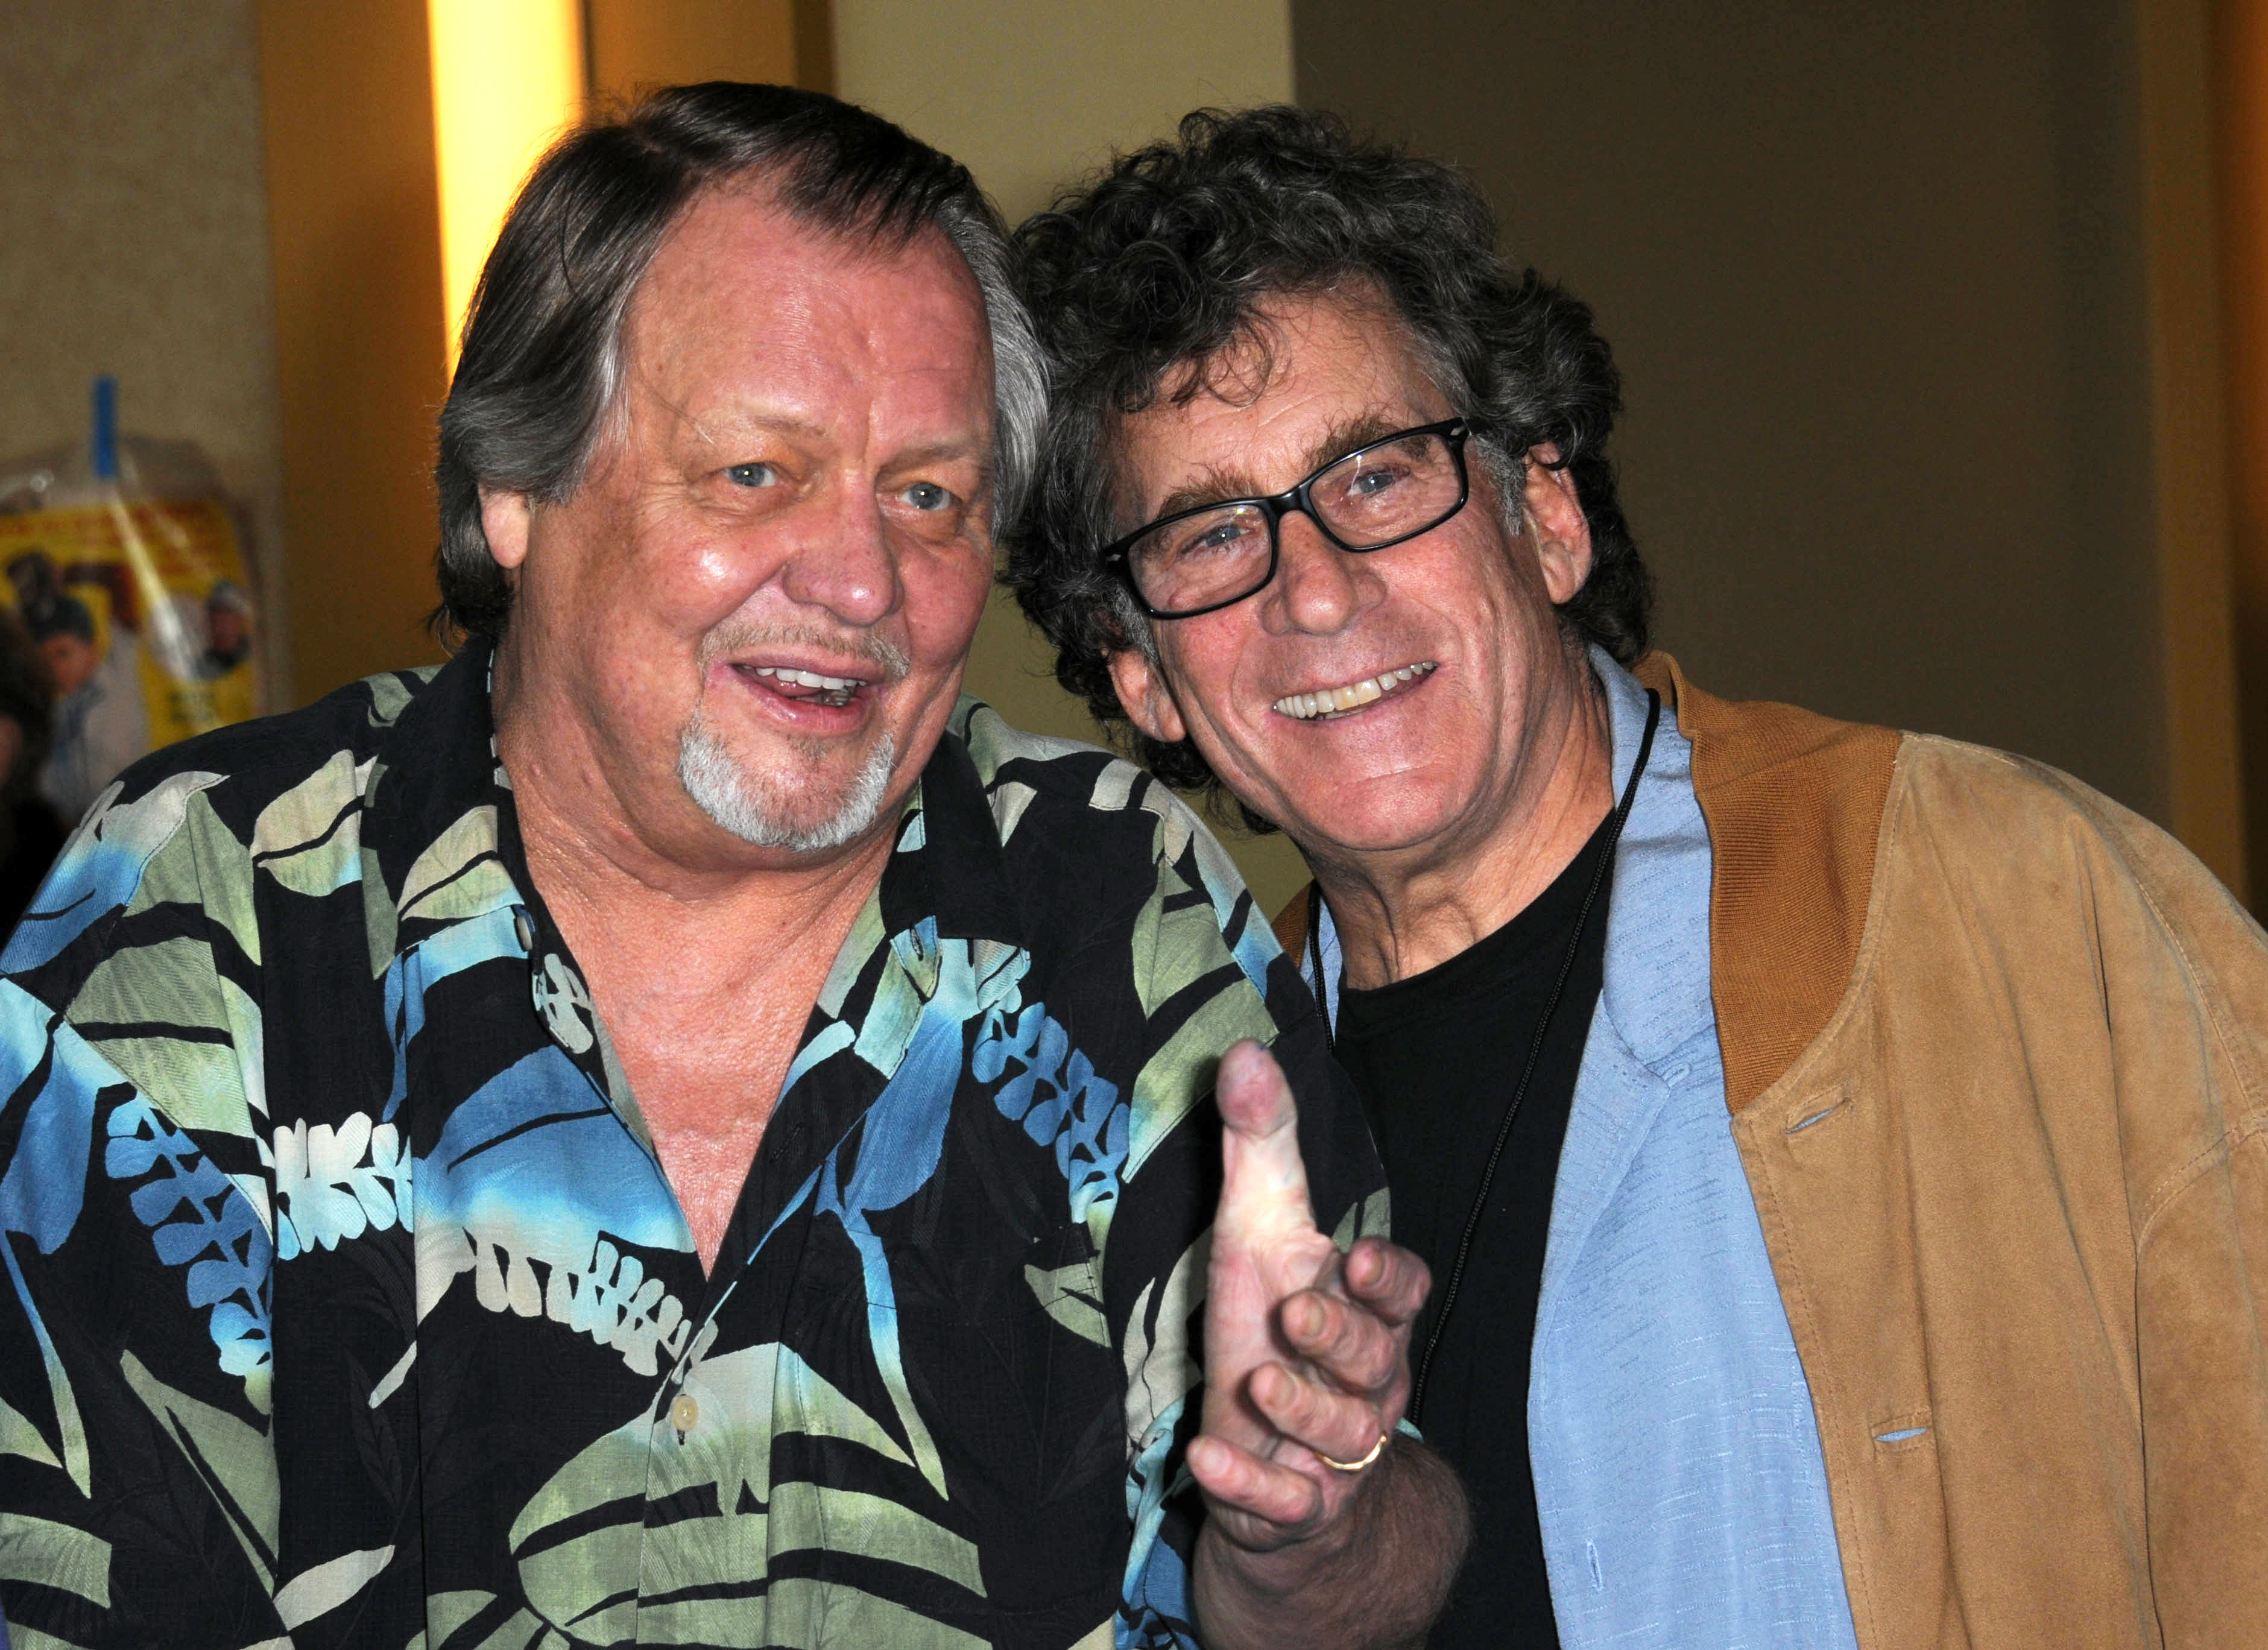 David Soul and Paul Michael Glaser at the Hollywood Show on February 11, 2012 | Photo: GettyImages